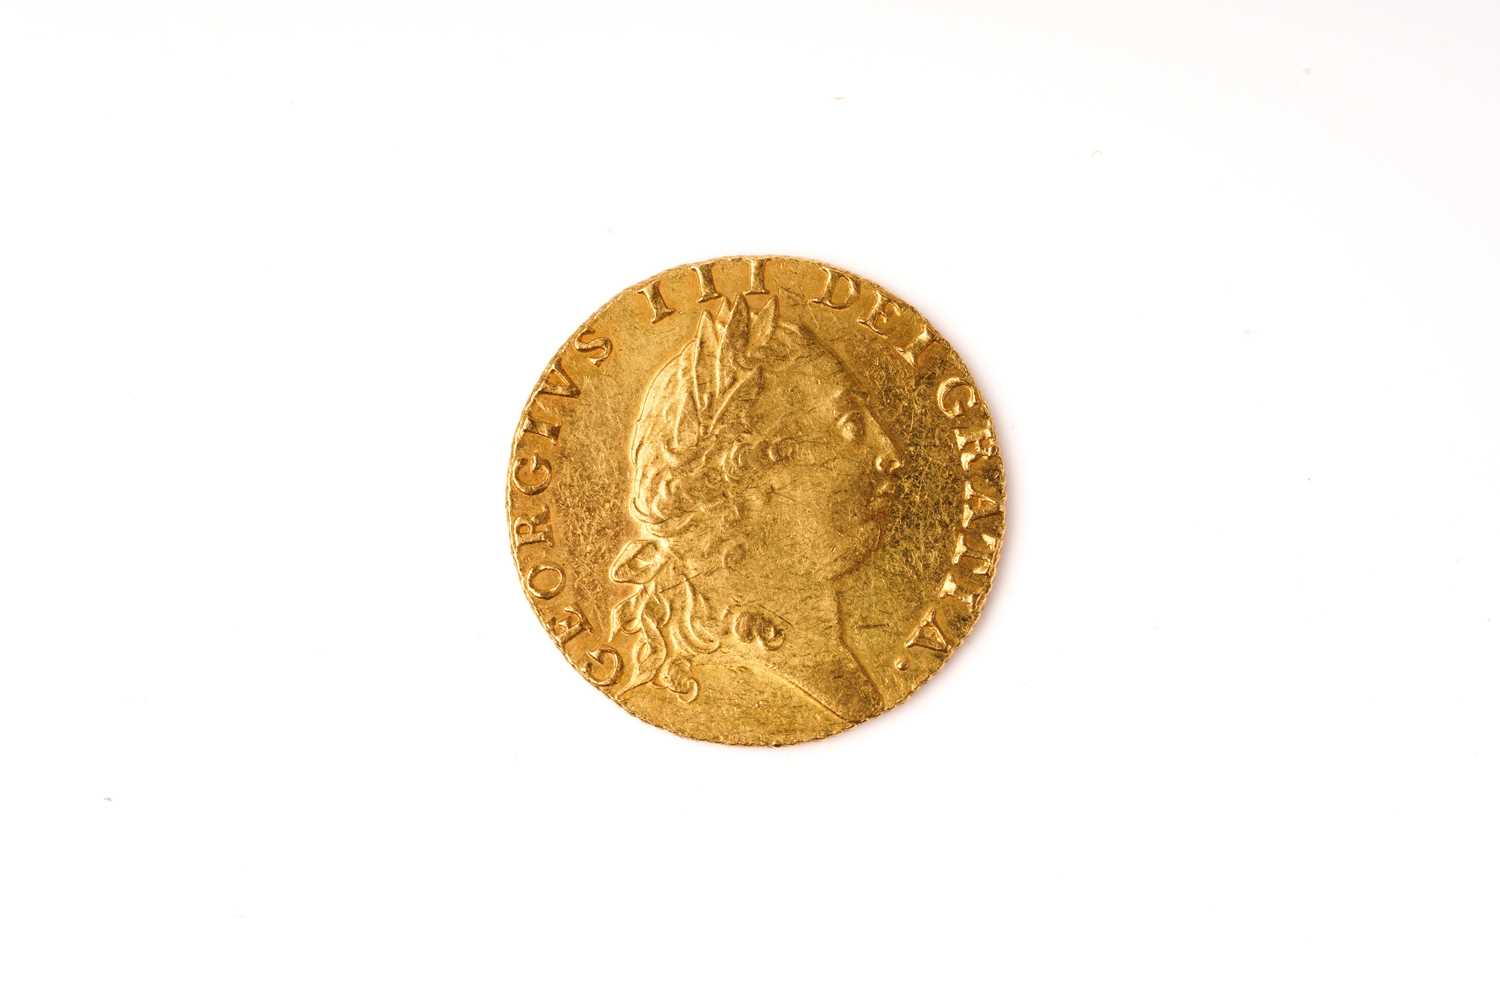 Geo III gold guinea, 1791, fifth laur. bust right, rev. crowned 'spade' shield. VFVF. No mounting